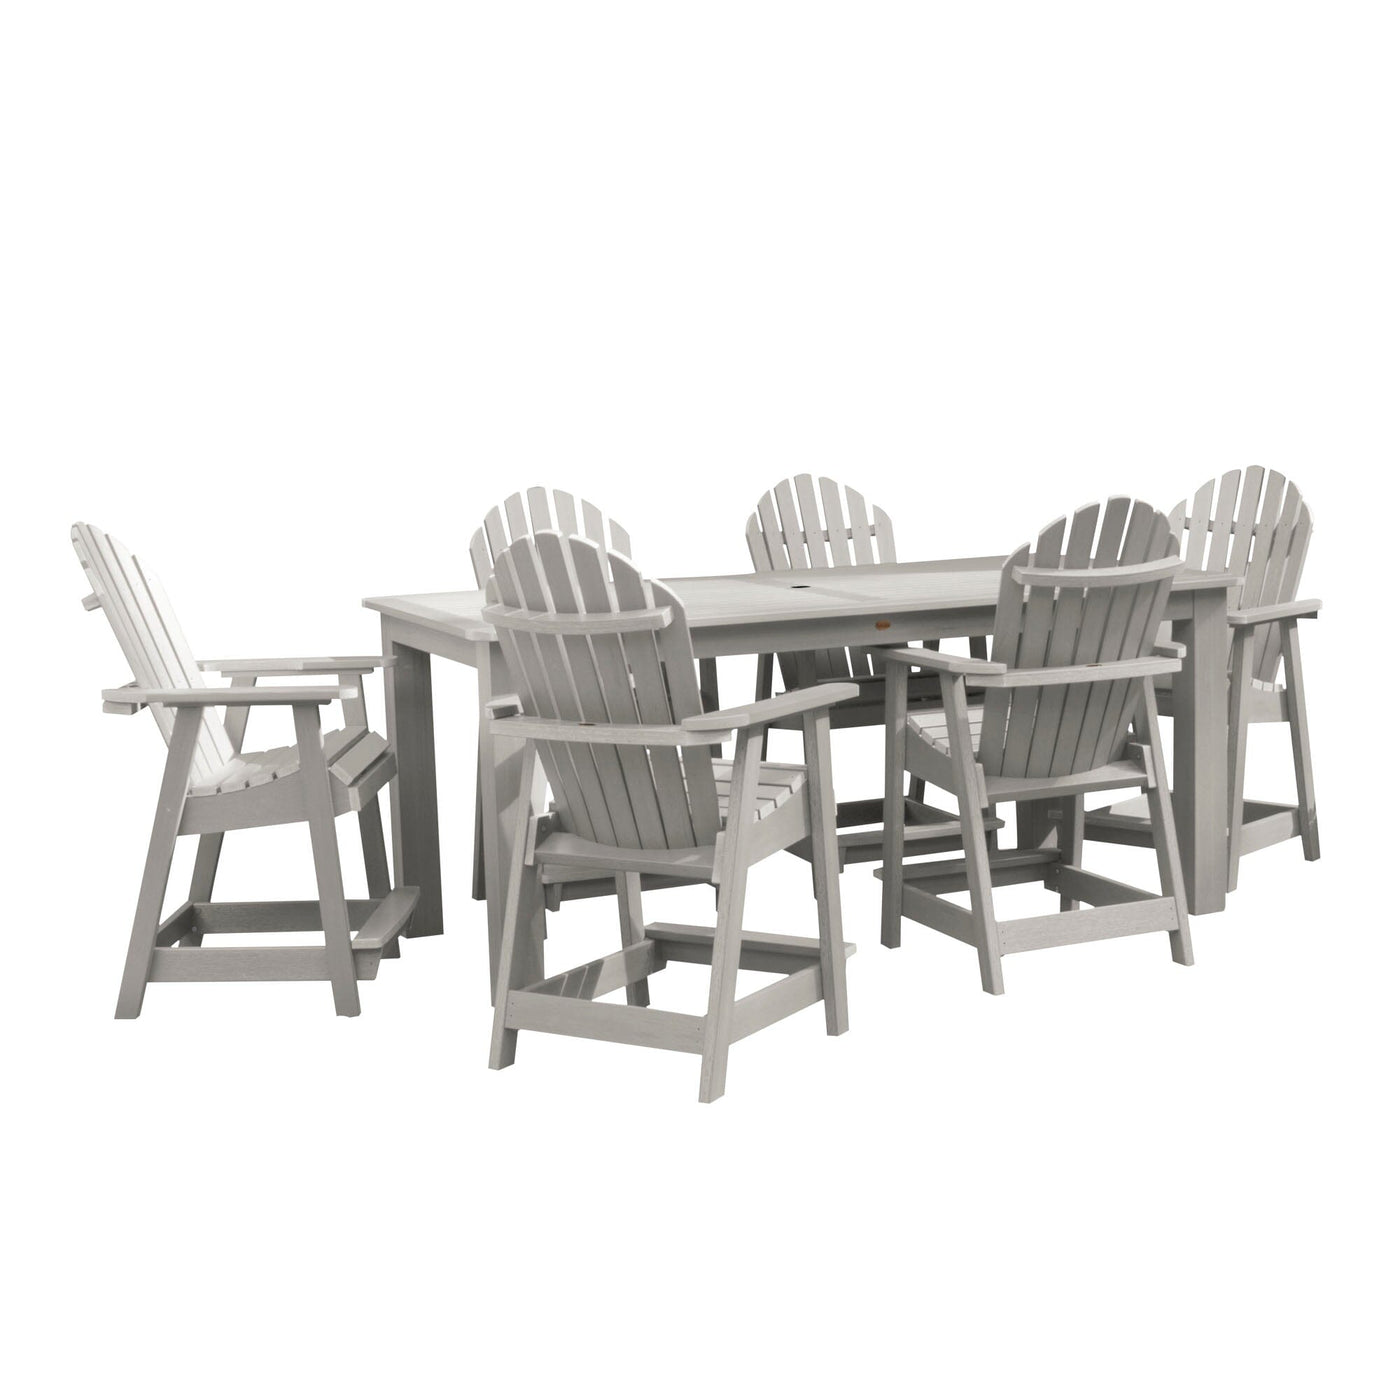 Hamilton 7pc Rectangular Outdoor Dining Set 42in x 84in - Counter Height Dining Highwood USA Harbor Gray 